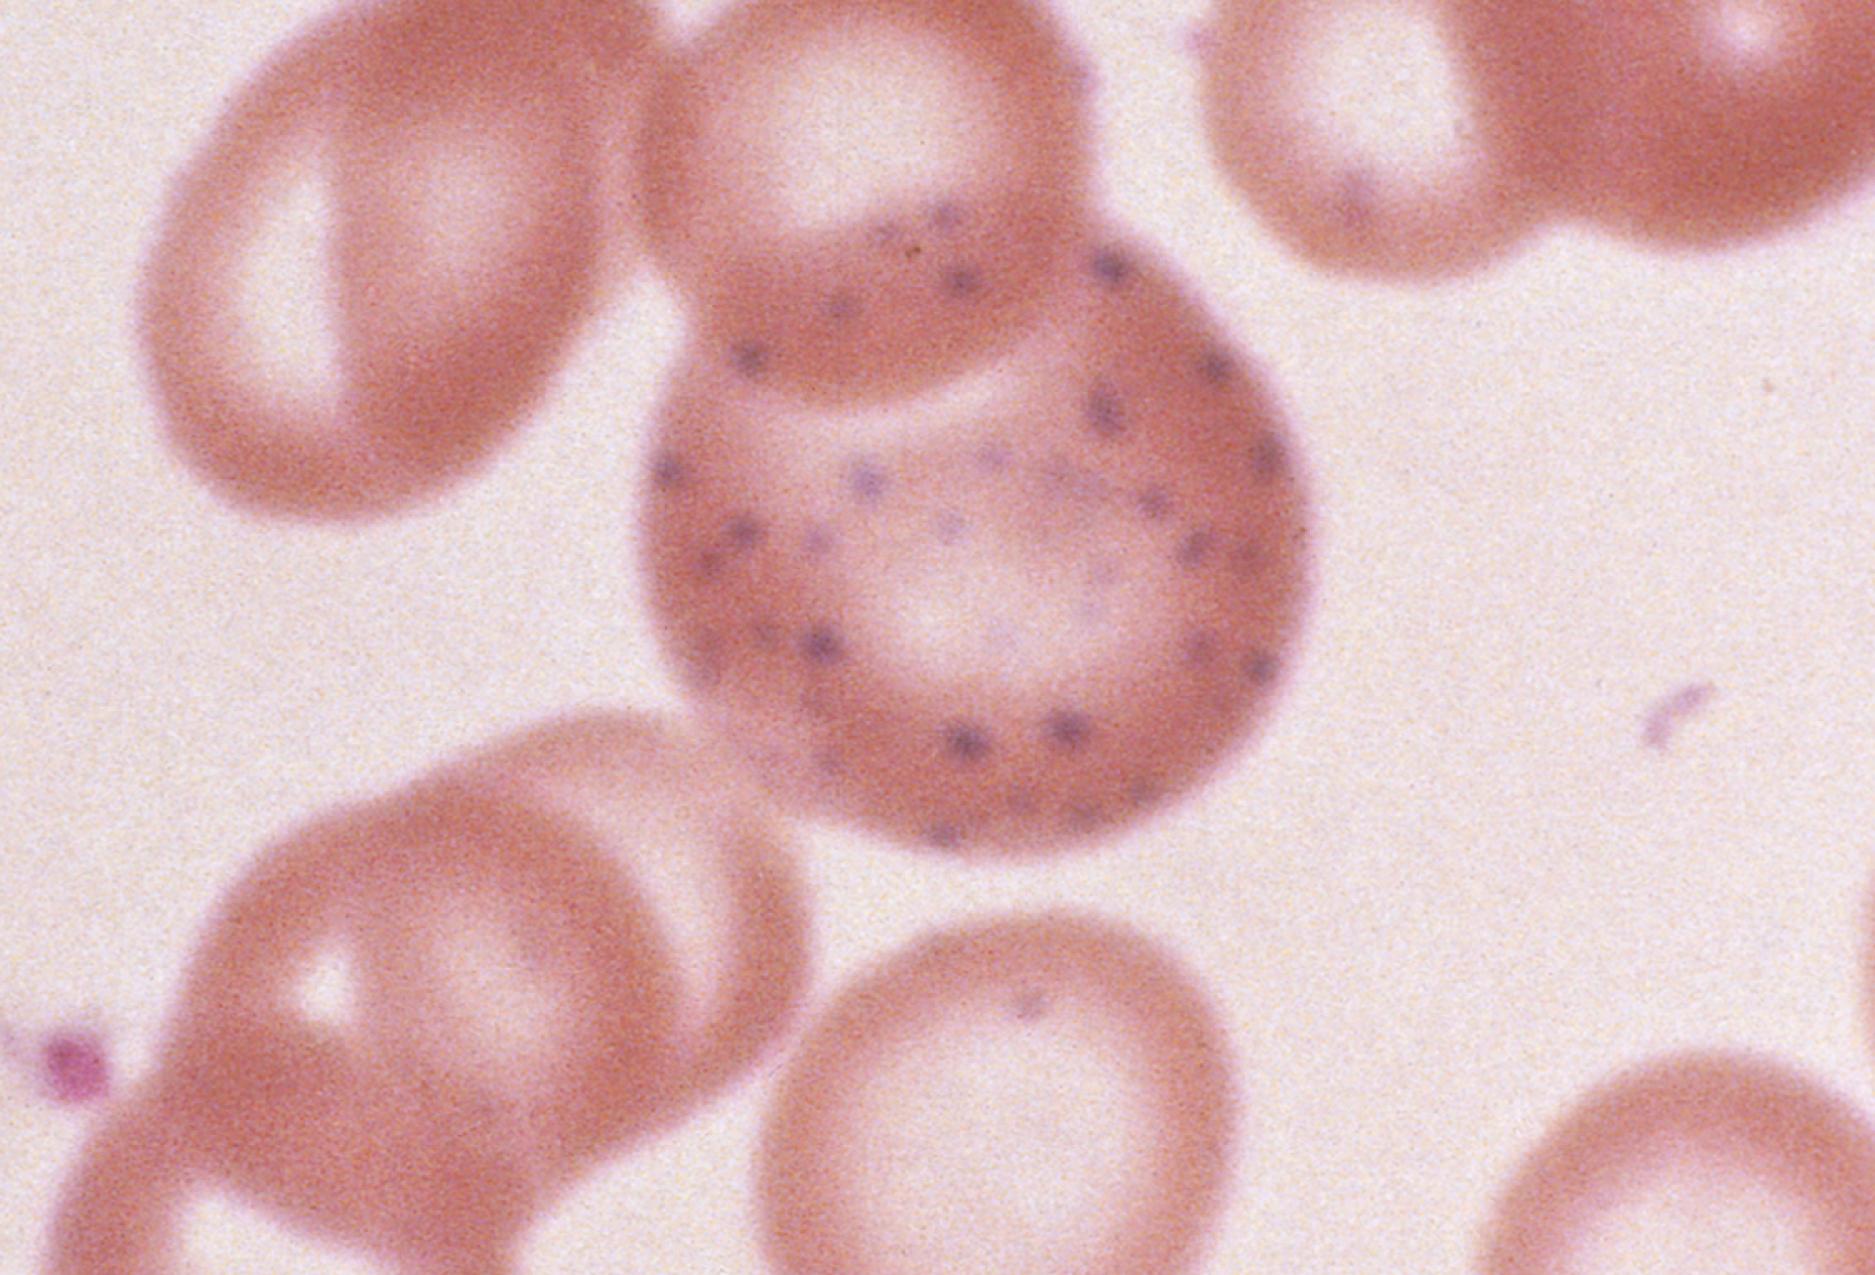 Fig. 12.8, Prominent basophilic stippling is often seen in thalassemia and treated iron deficiency, but classically is thought of in cases of severe lead intoxication. However, this finding is not specific for any diagnosis.